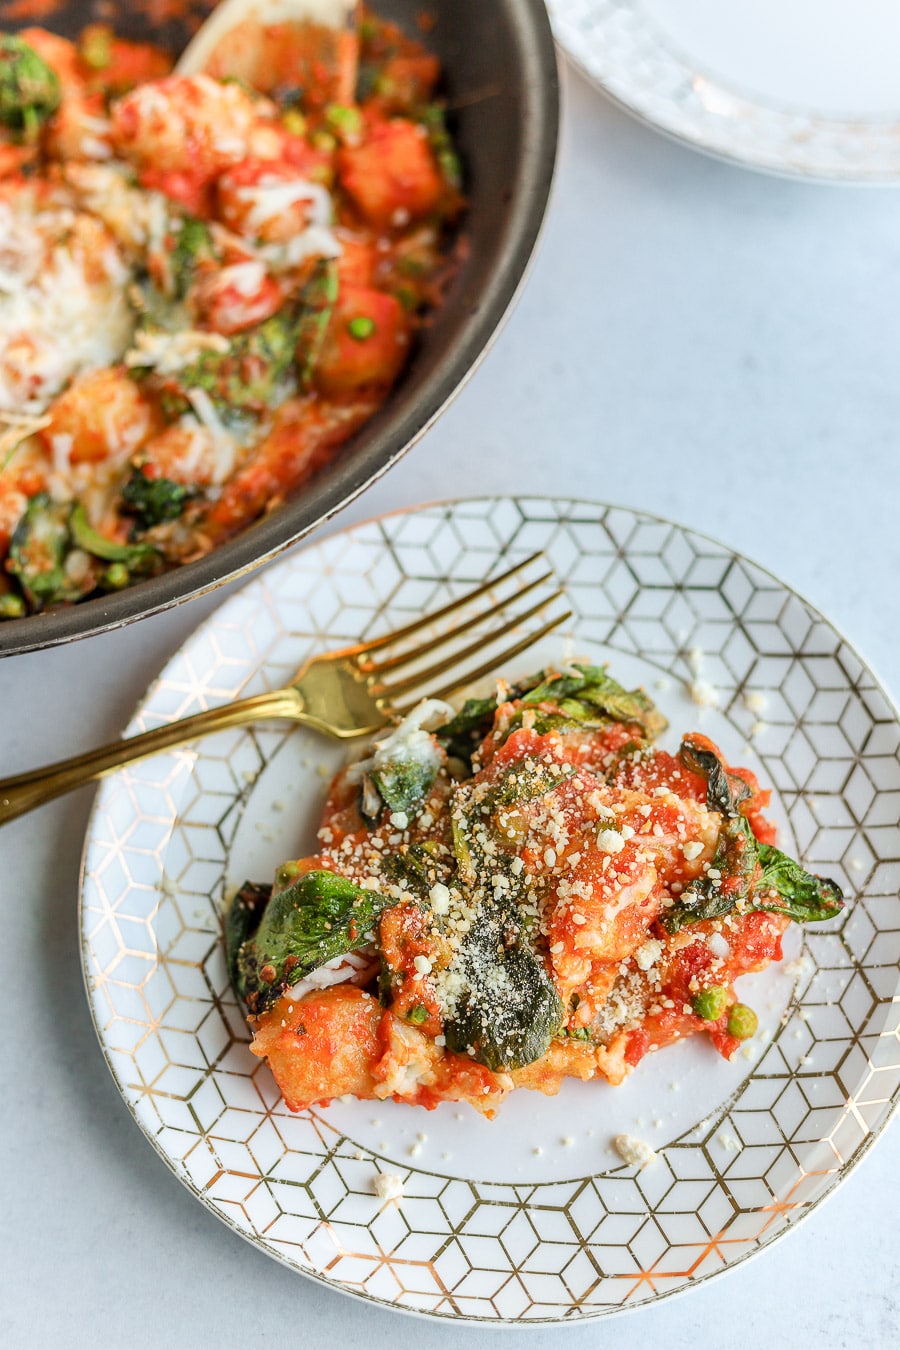 Trader Joe's Cauliflower Gnocchi is one of my favorite TJ's products. This baked cauliflower gnocchi makes for such an easy vegetable-packed dinner!